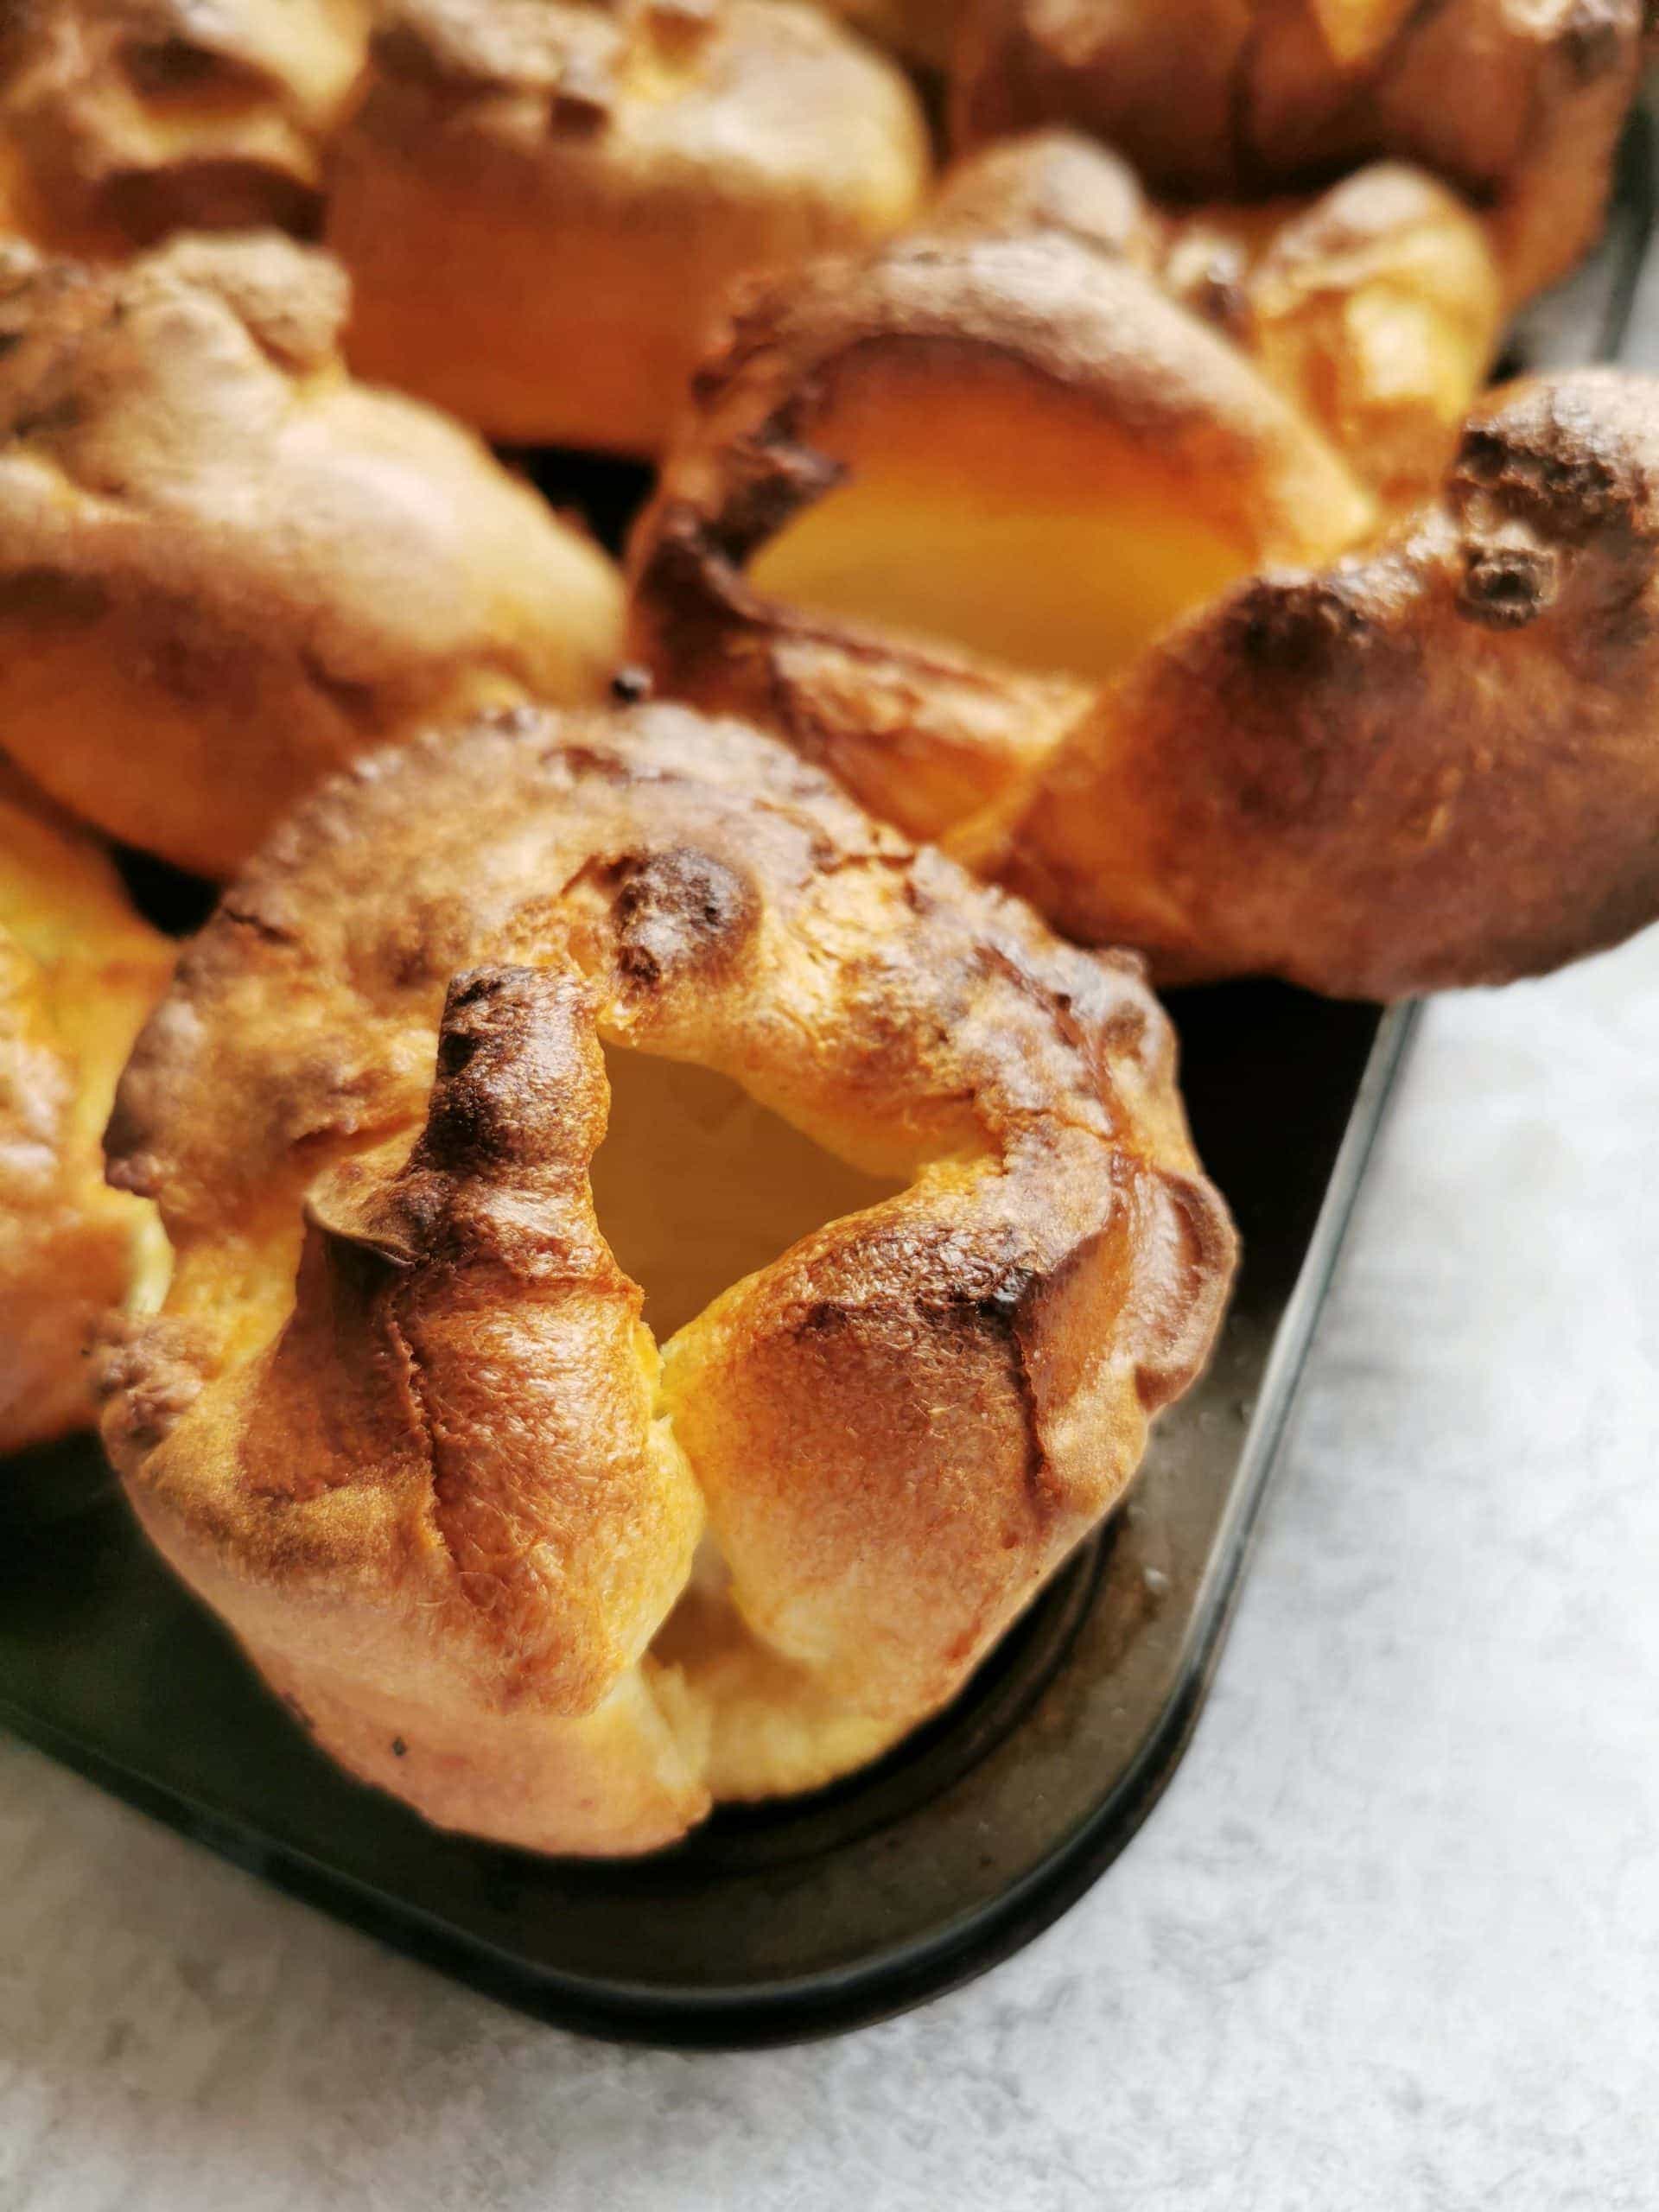 A close up picture of a yorkshire pudding in a muffin tin